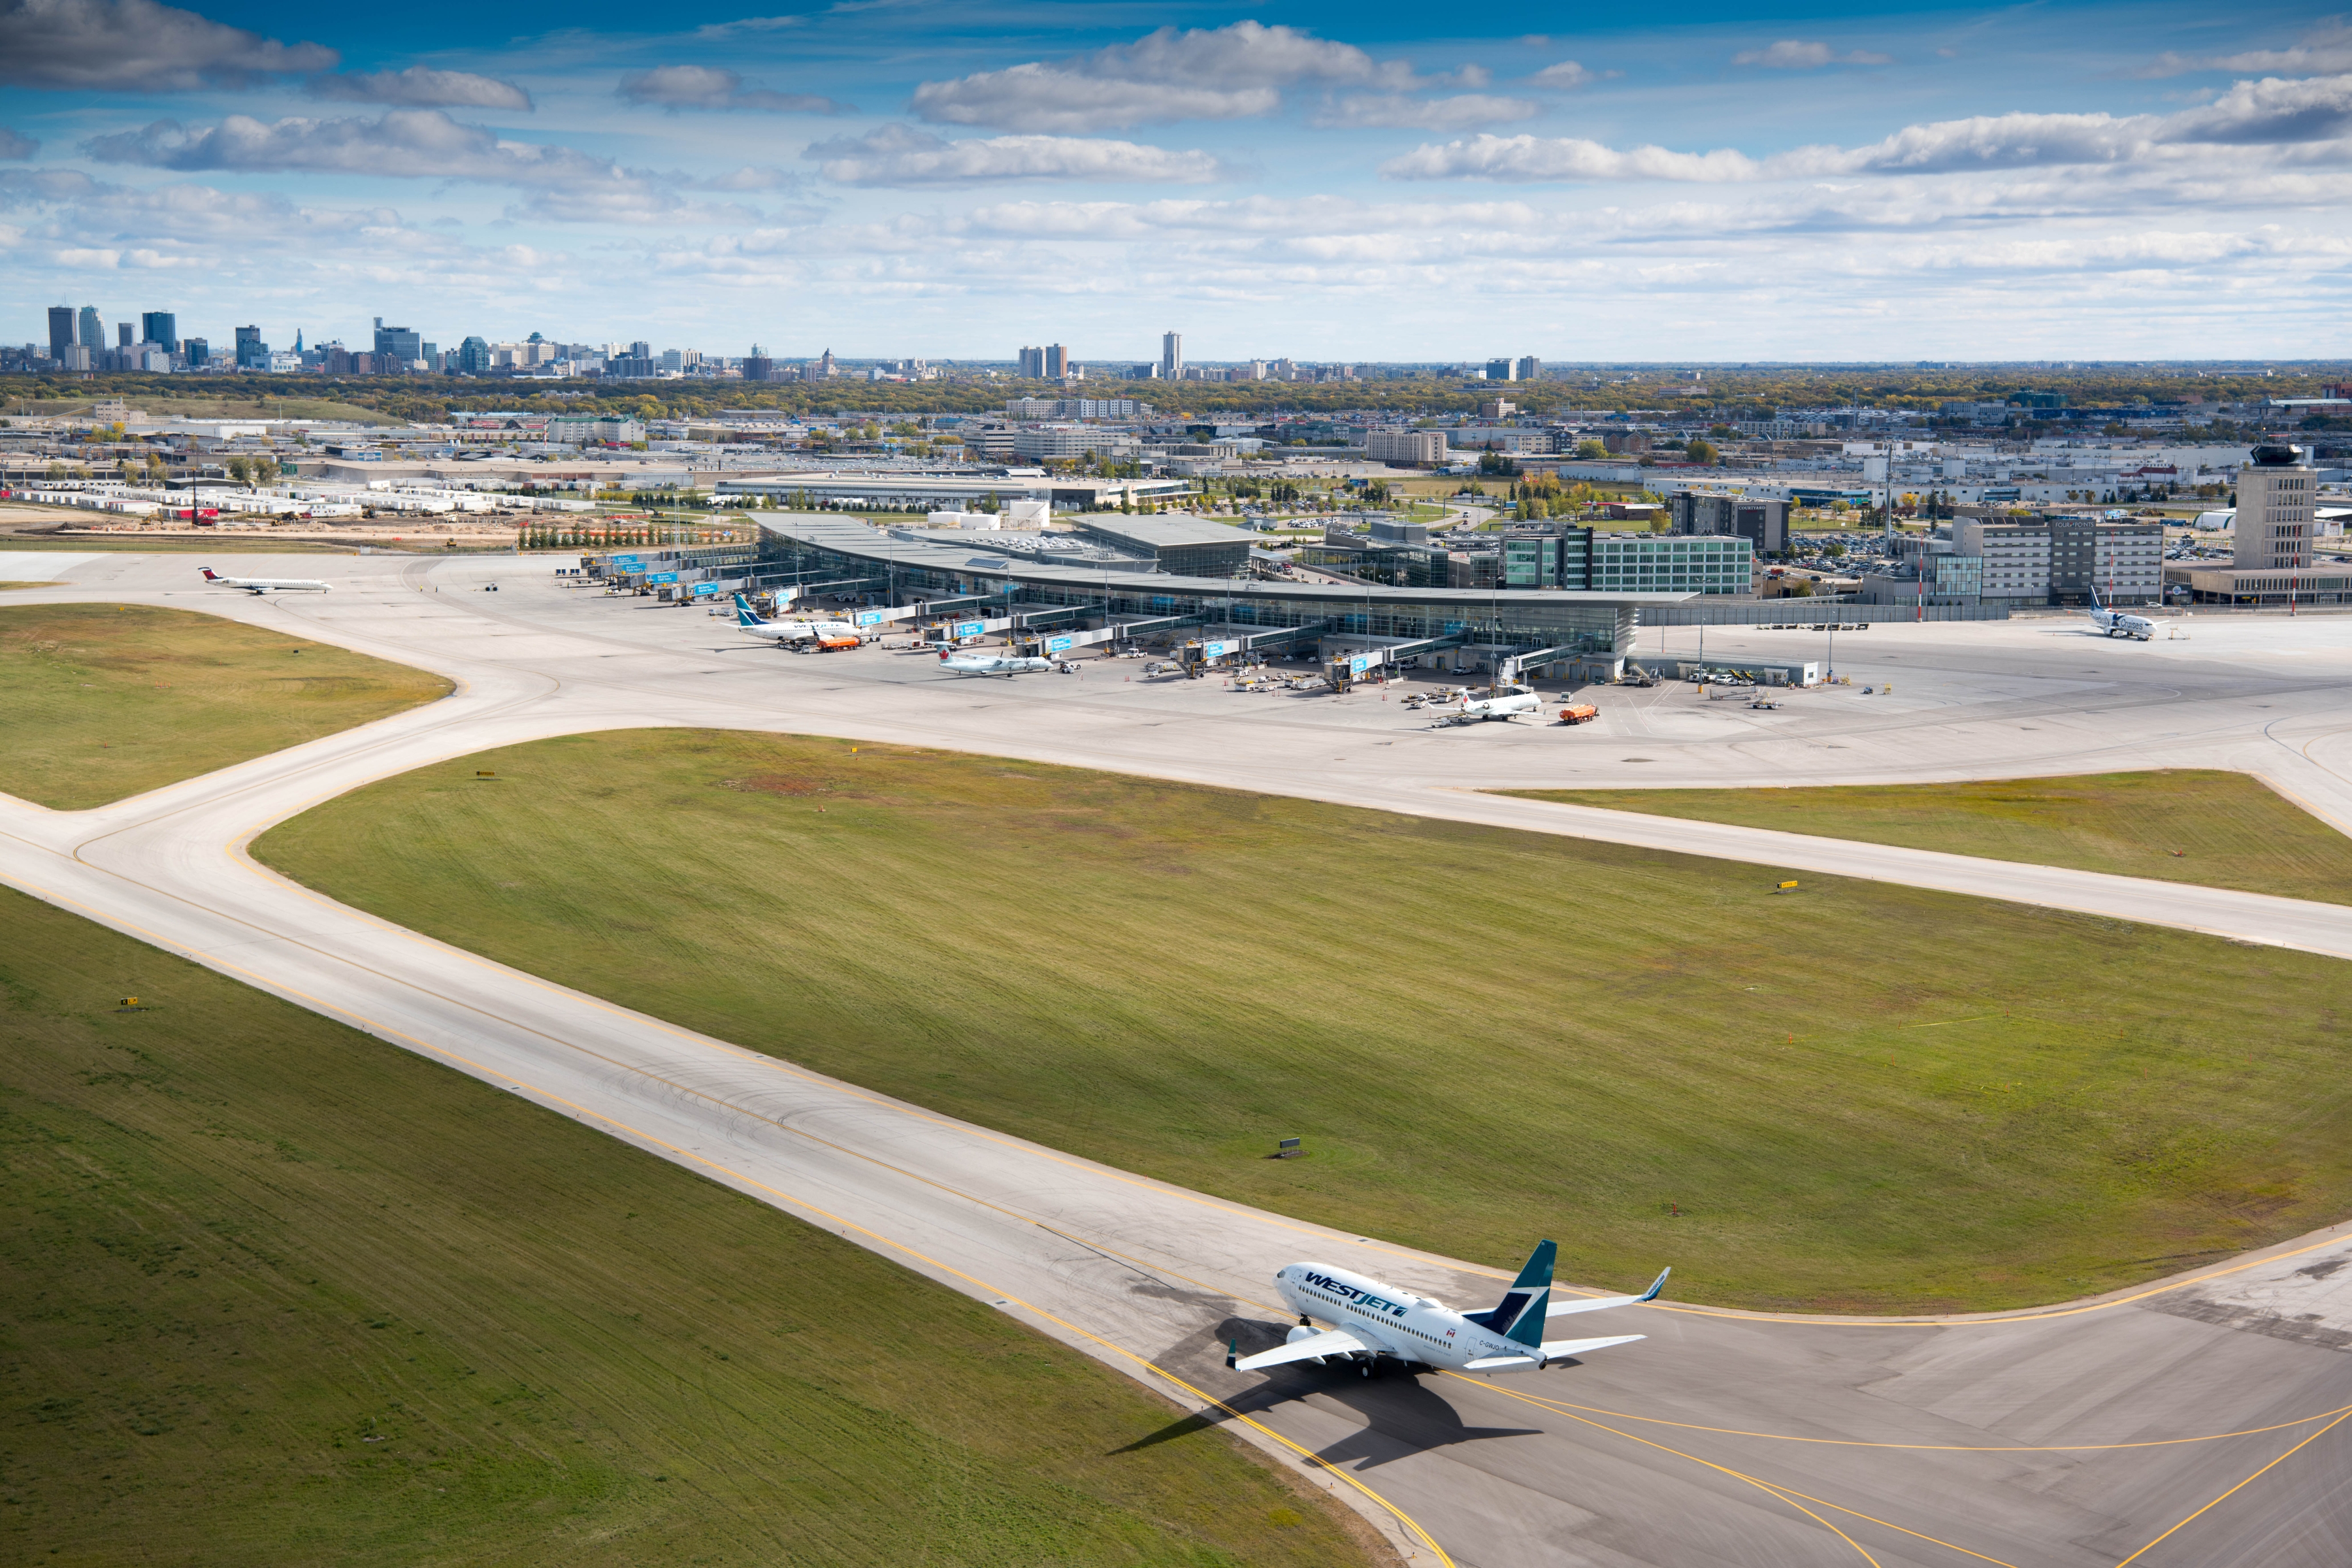 A WestJet plane taxis towards the Winnipeg Richardson International Airport terminal with the city skyline in the background.